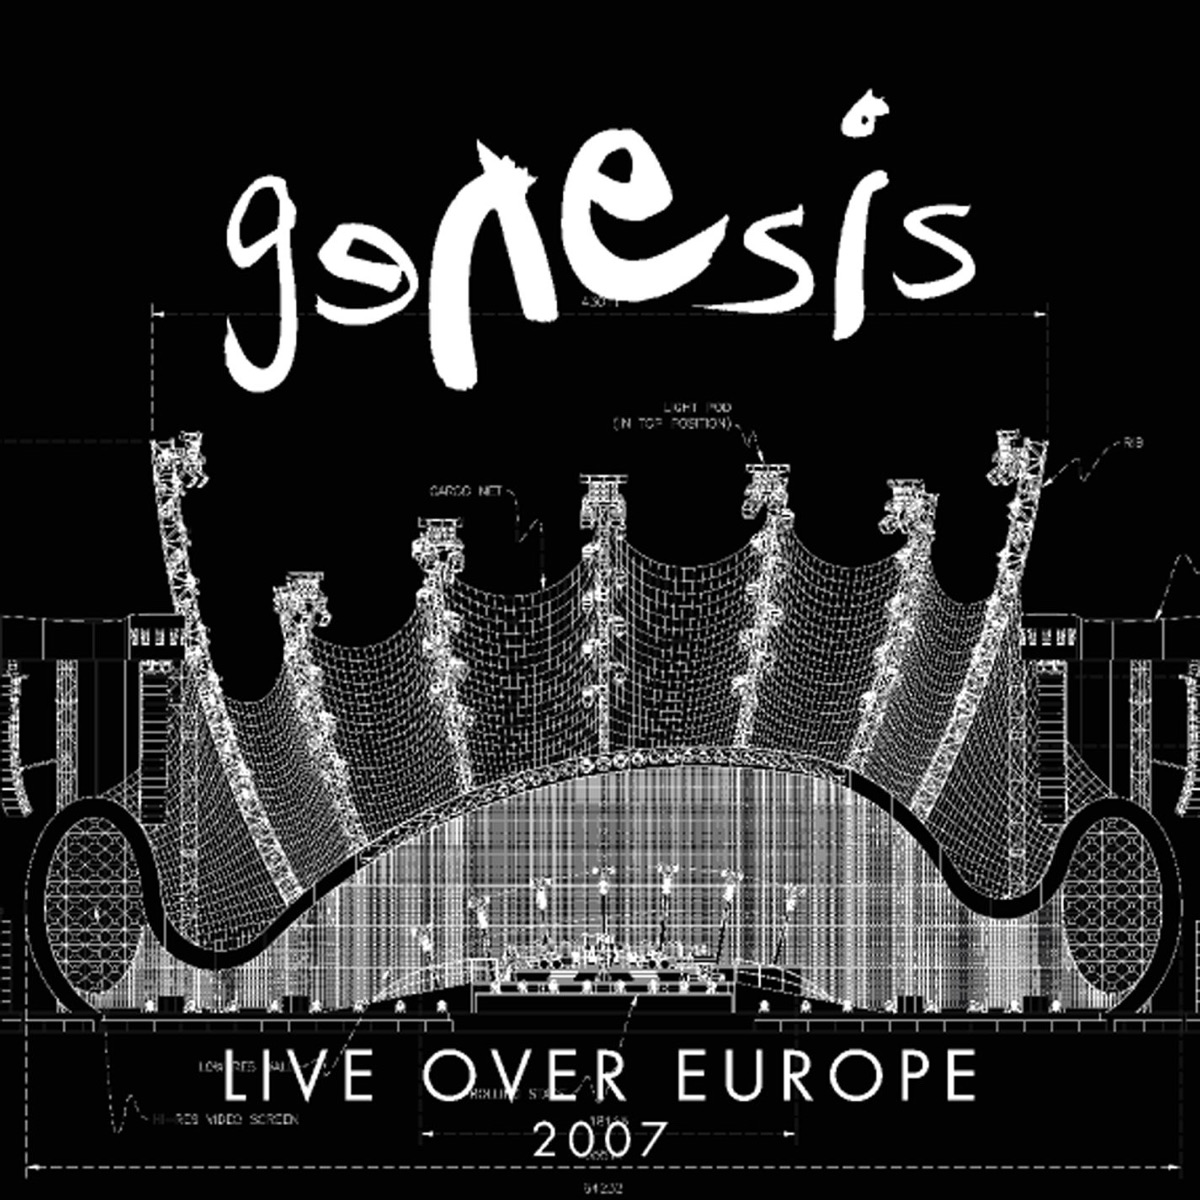 Live Over Europe 2007 - Album by Genesis - Apple Music